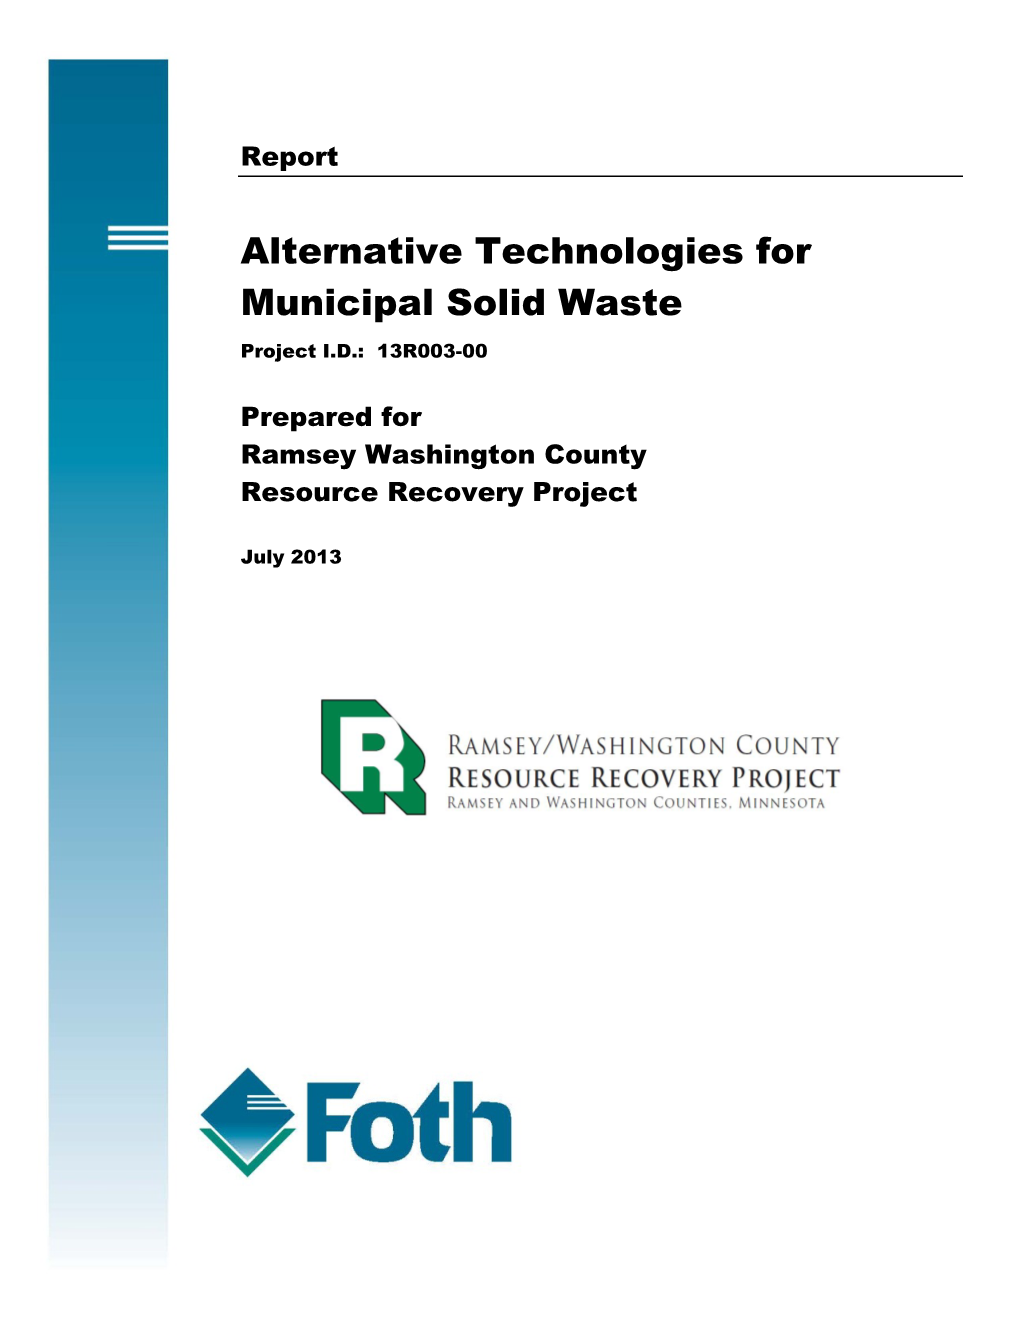 Alternative Technologies for Municipal Solid Waste Project I.D.: 13R003-00